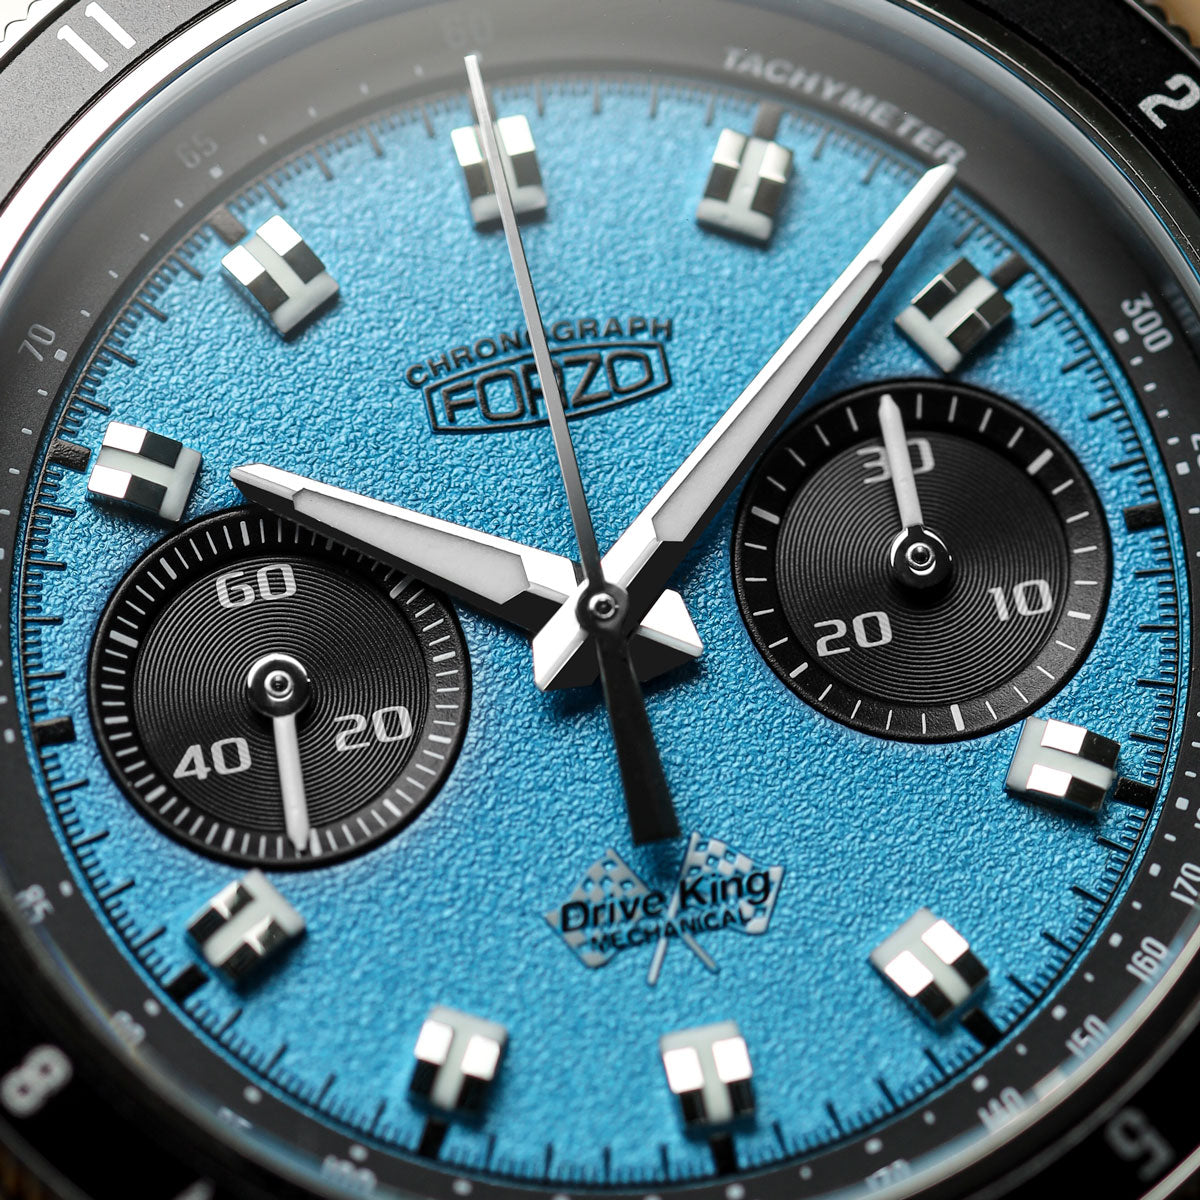 FORZO Drive King Mechanical Chronograph - Blue Dial - 3-Link Bracelet - additional image 1